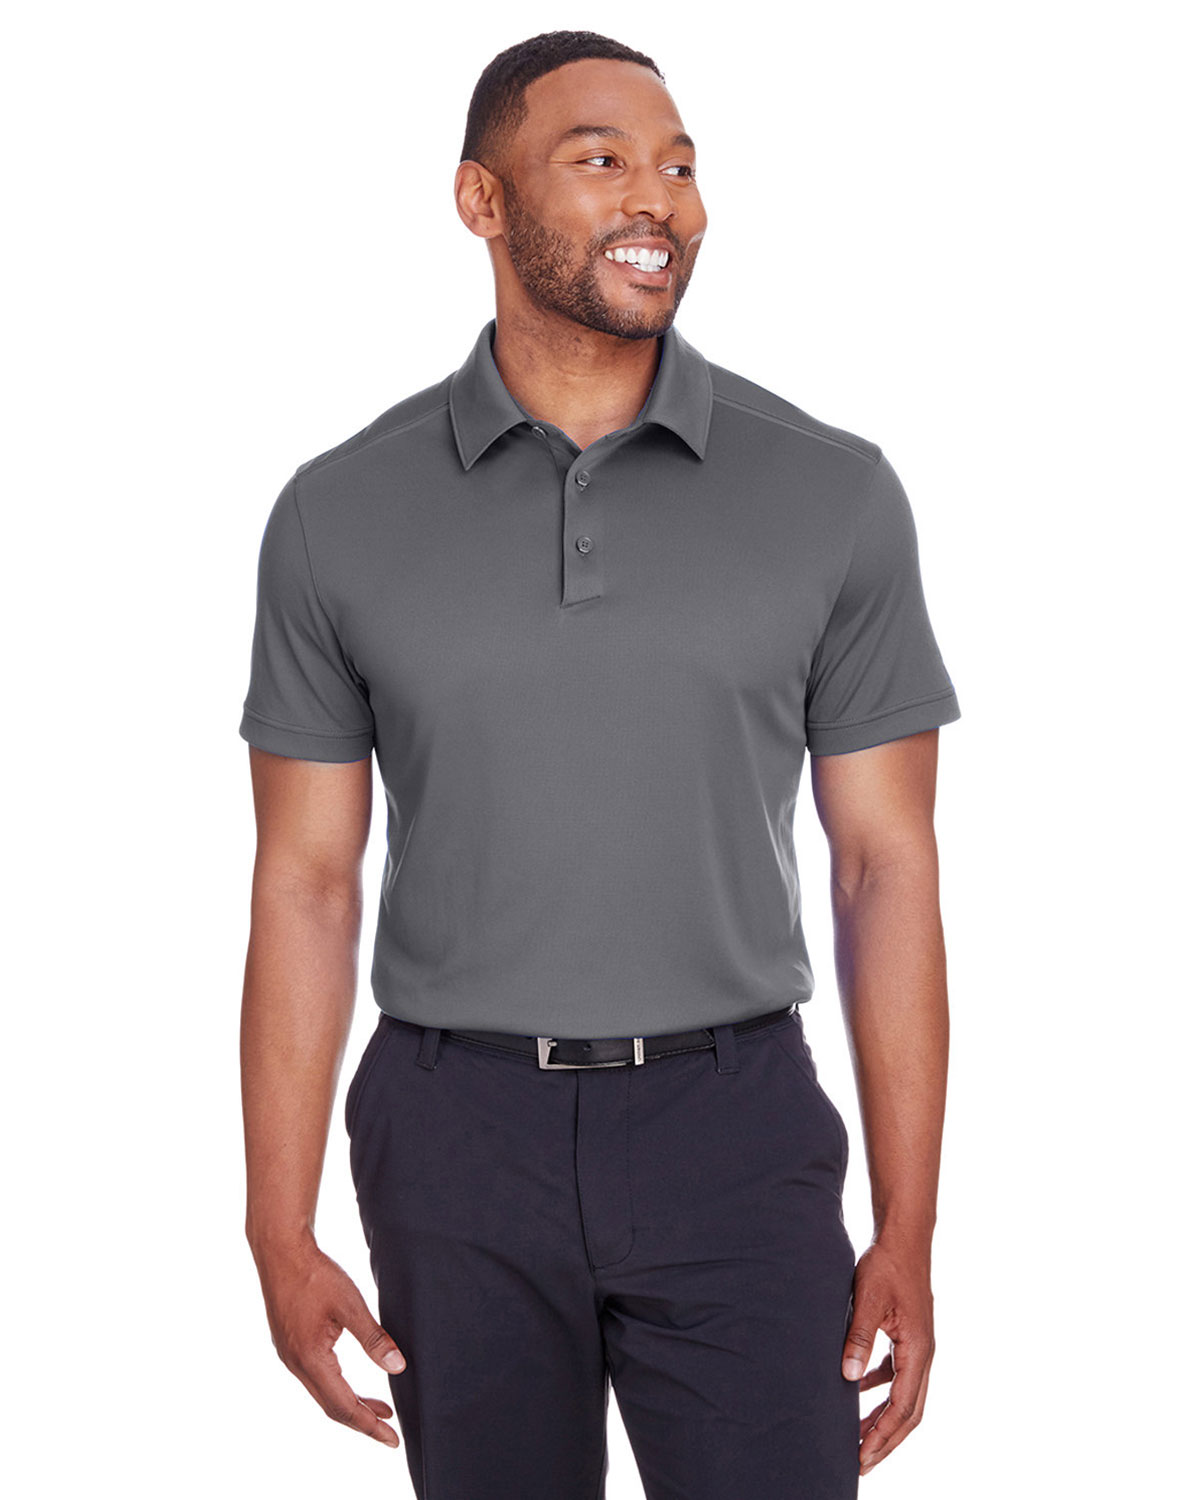 Custom Embroidered Spyder S16532 Men Freestyle Polo at Apparelstation